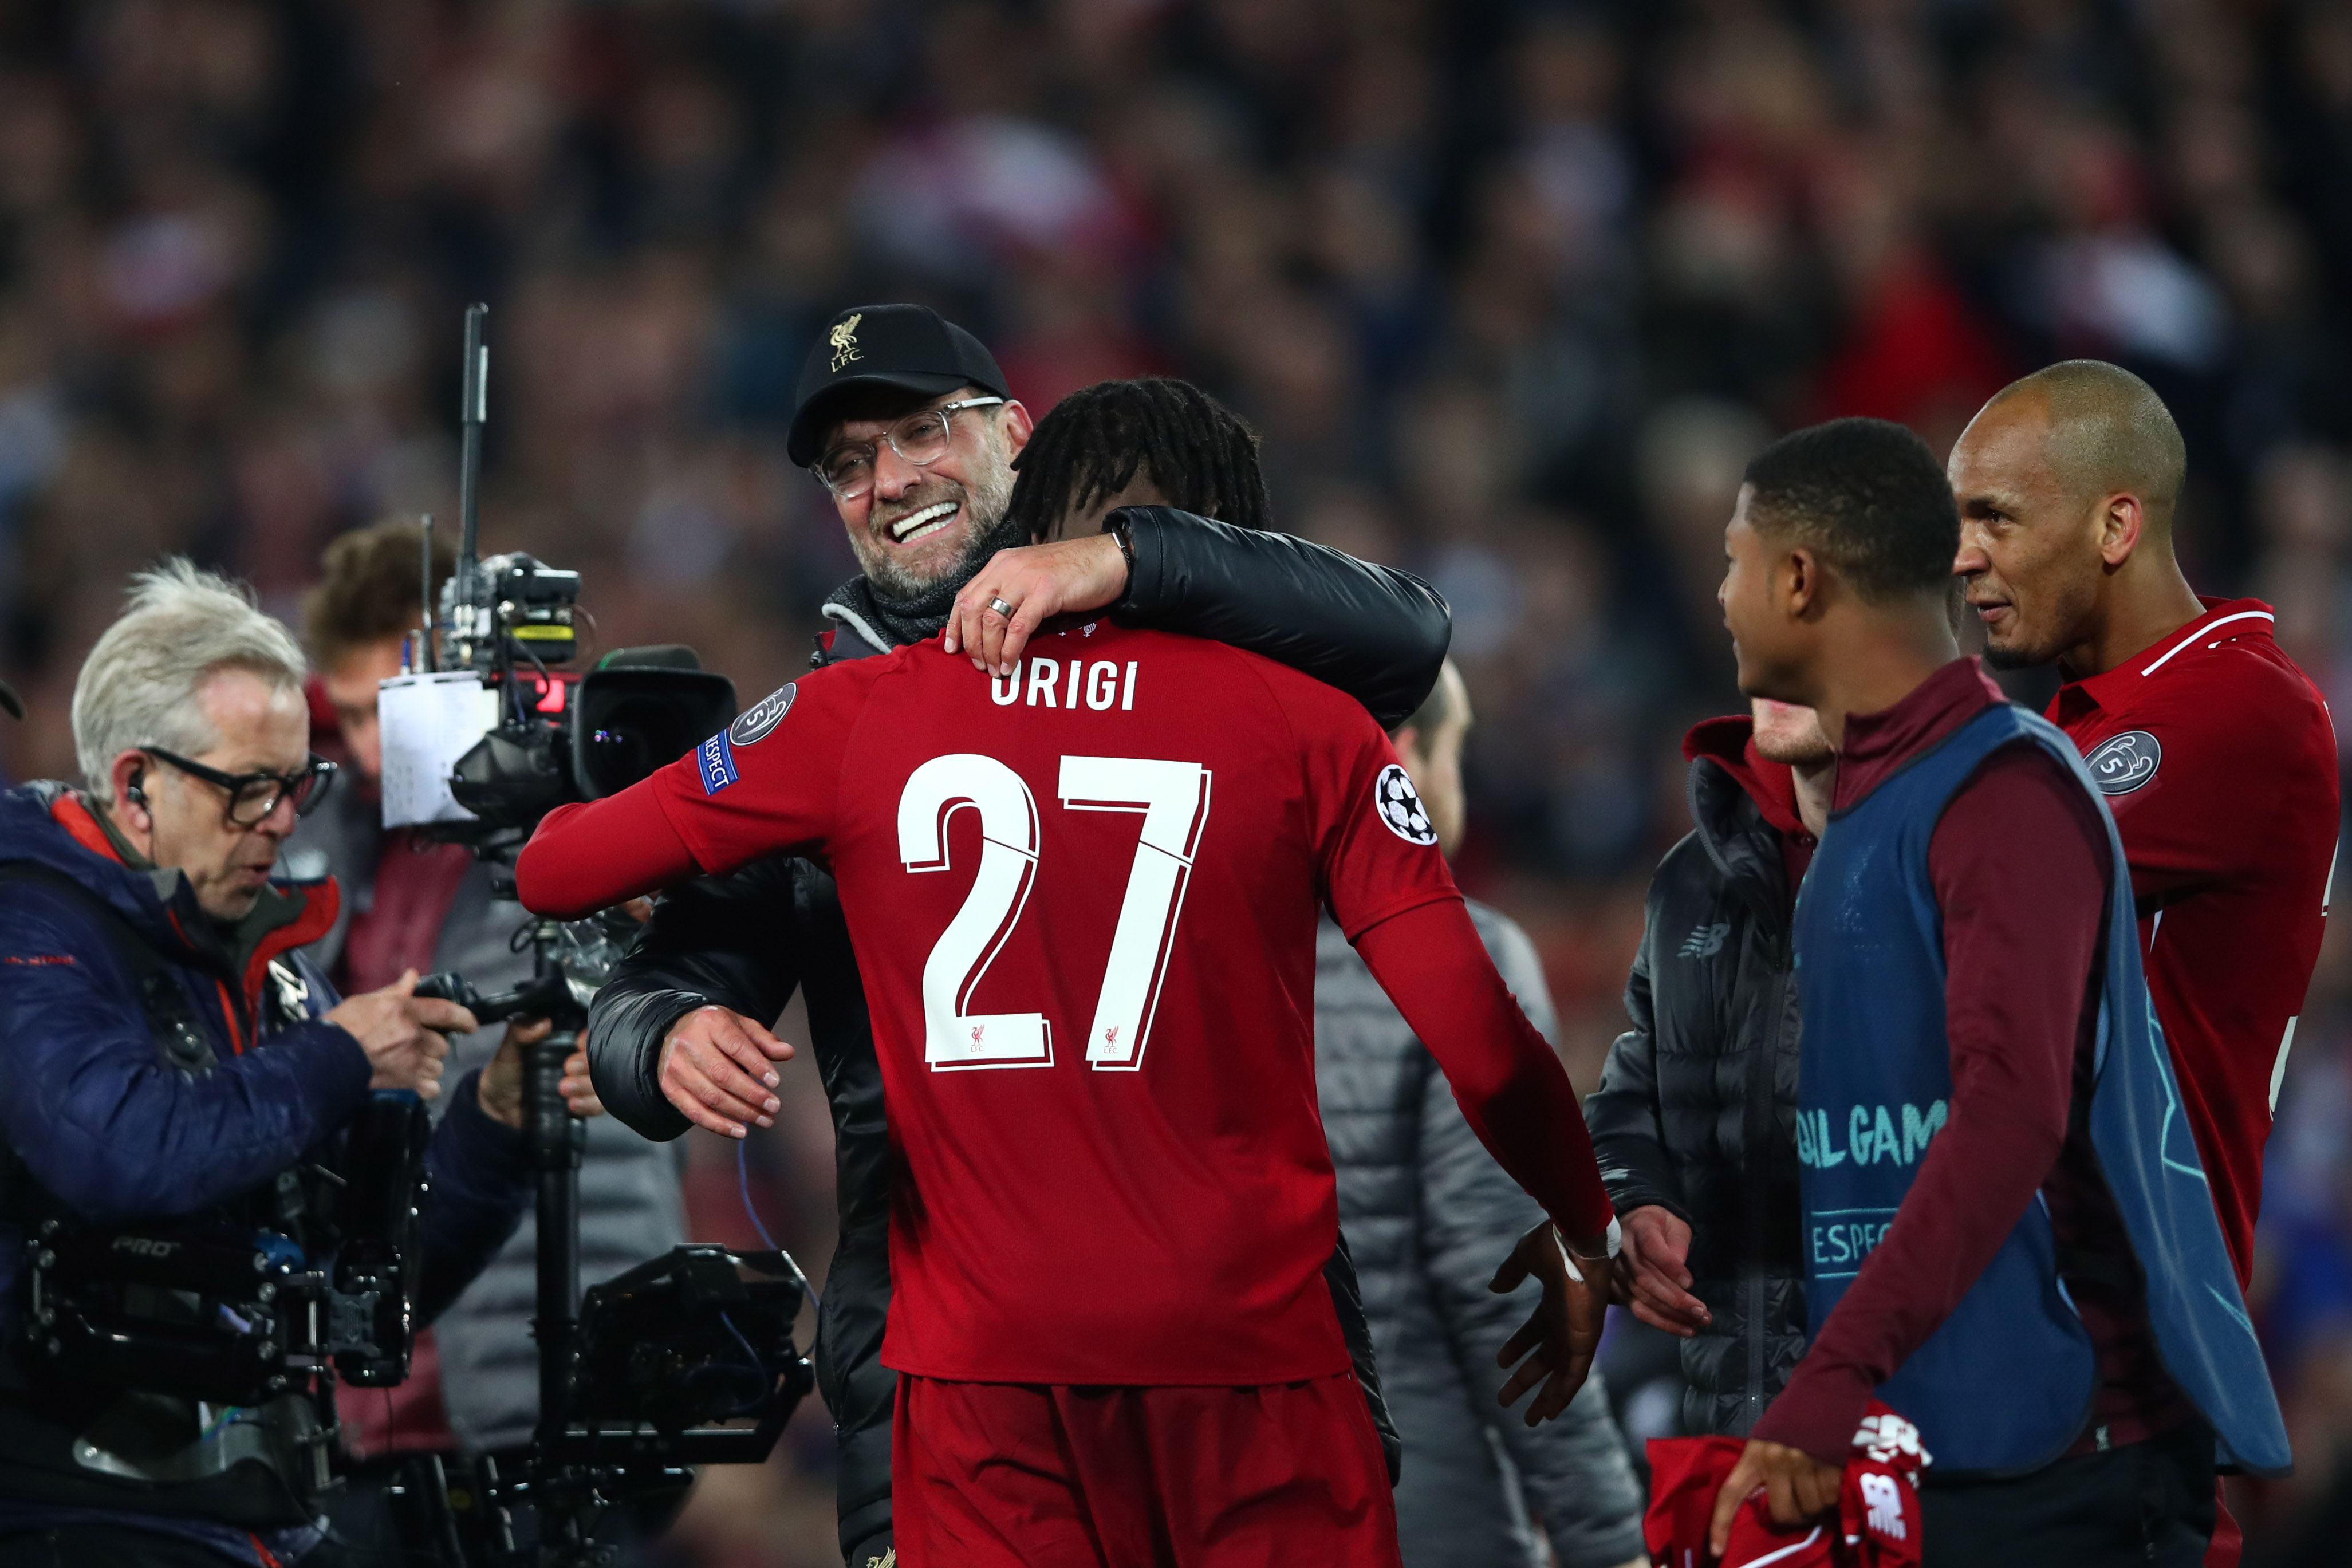 LIVERPOOL, ENGLAND - MAY 07:  Jurgen Klopp, Manager of Liverpool and Divock Origi celebrate after the UEFA Champions League Semi Final second leg match between Liverpool and Barcelona at Anfield on May 07, 2019 in Liverpool, England. (Photo by Clive Brunskill/Getty Images)